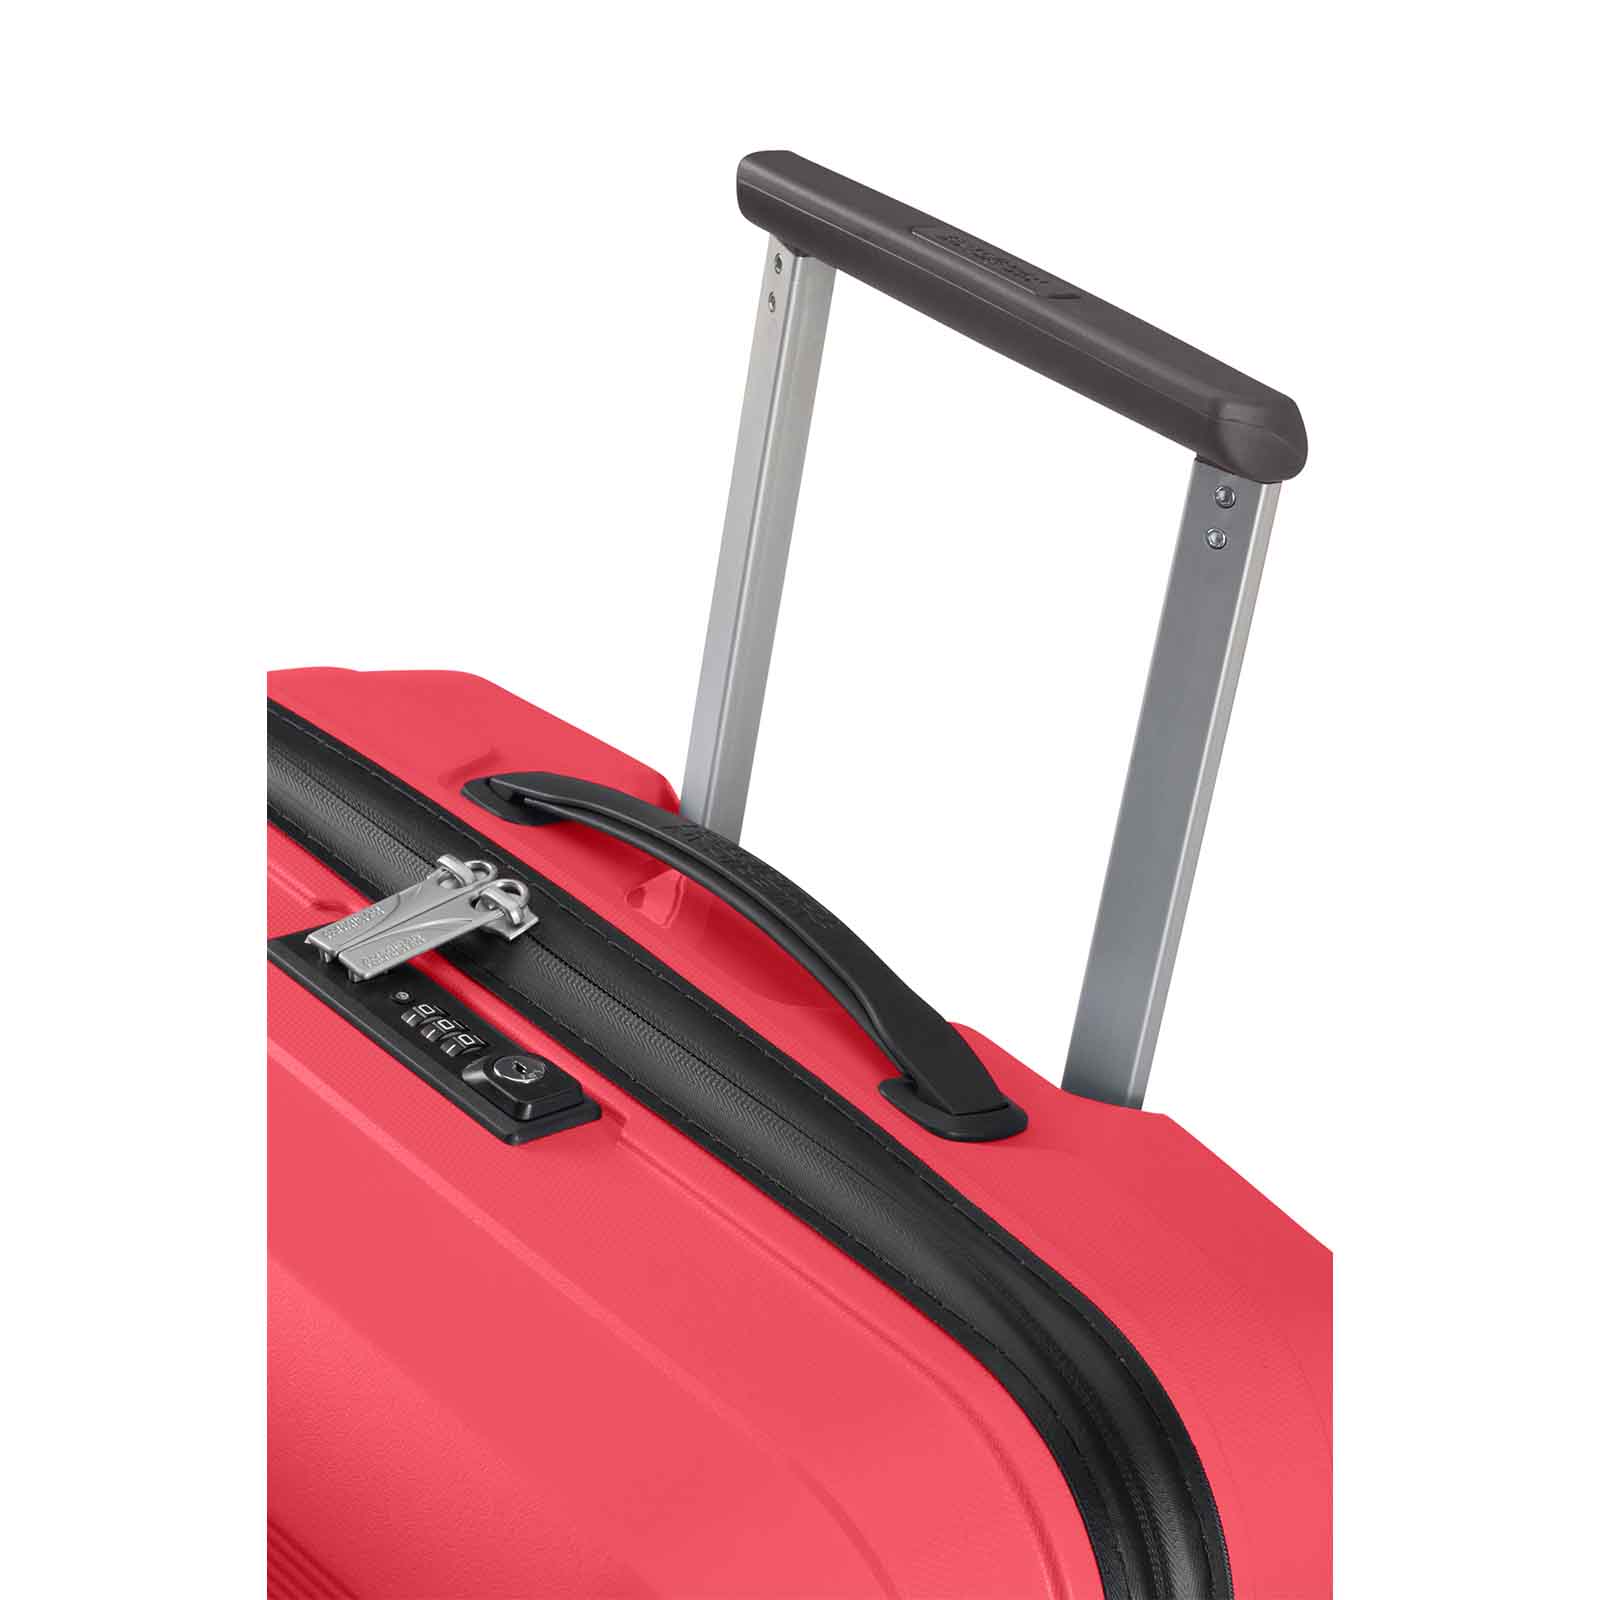 American-Tourister-Airconic-77cm-Suitcase-Paradise-Pink-Handle